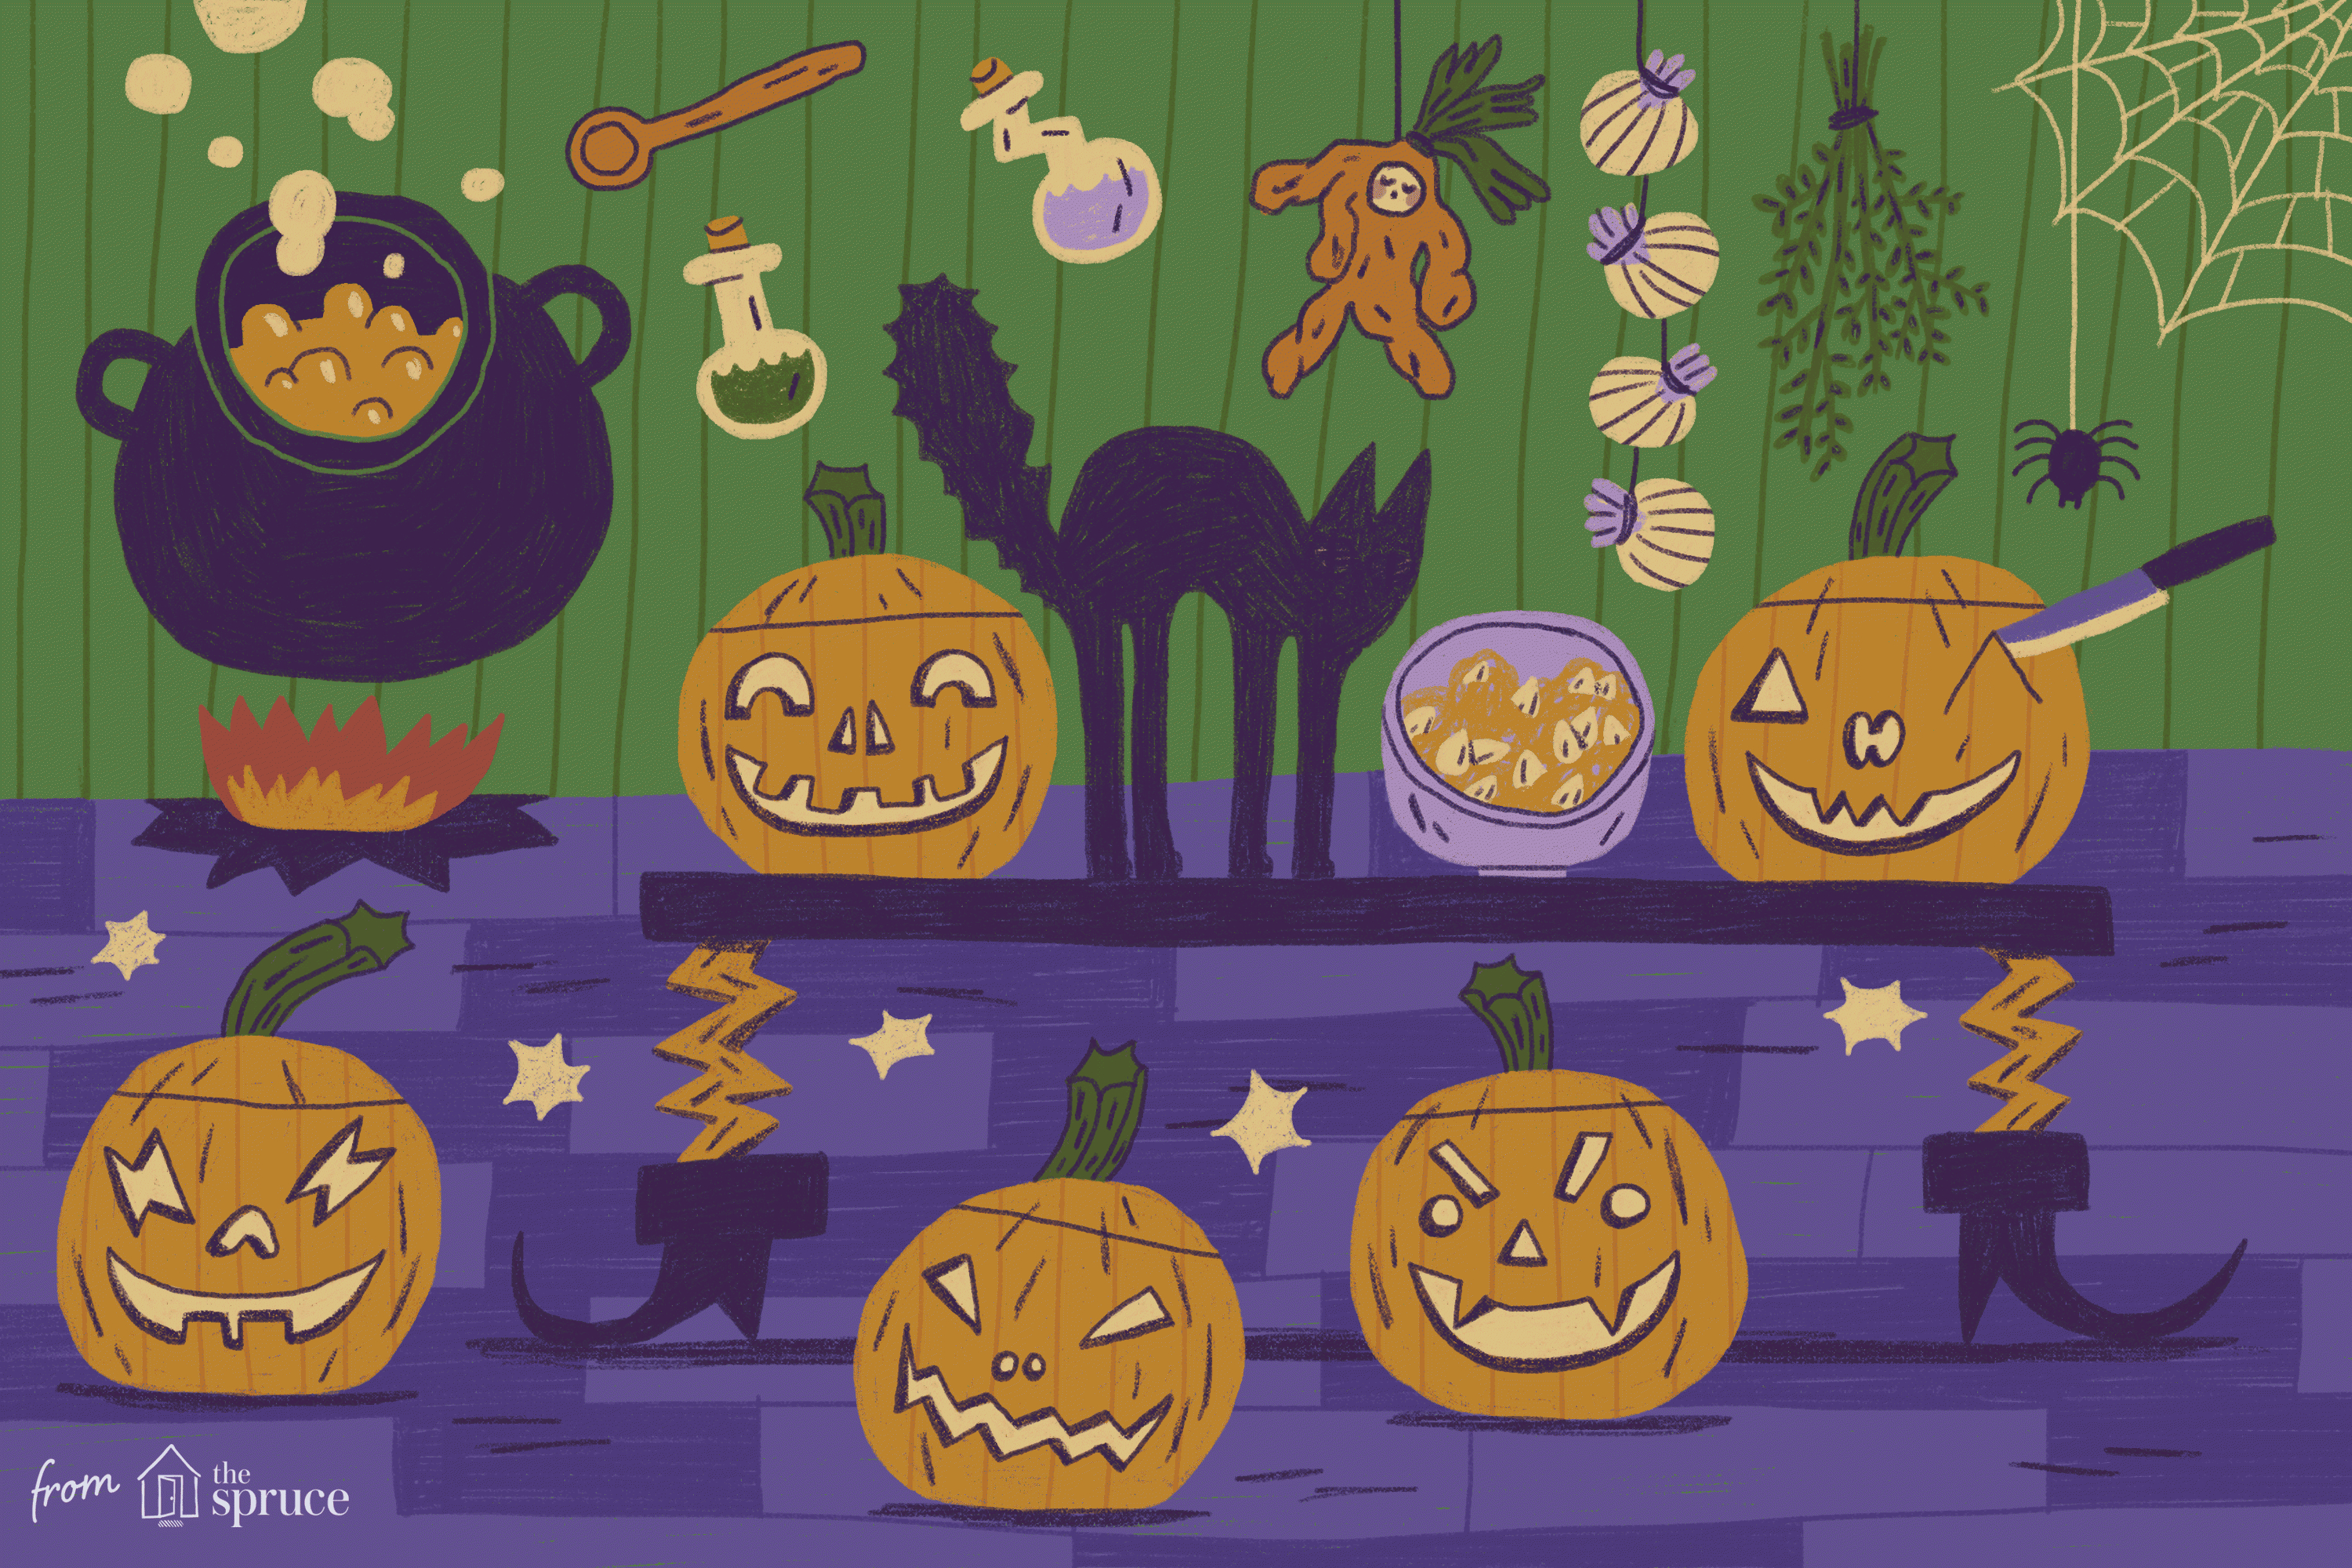 Free Pumpkin Carving Patterns And Templates For Halloween - Pumpkin Carving Patterns Free Printable